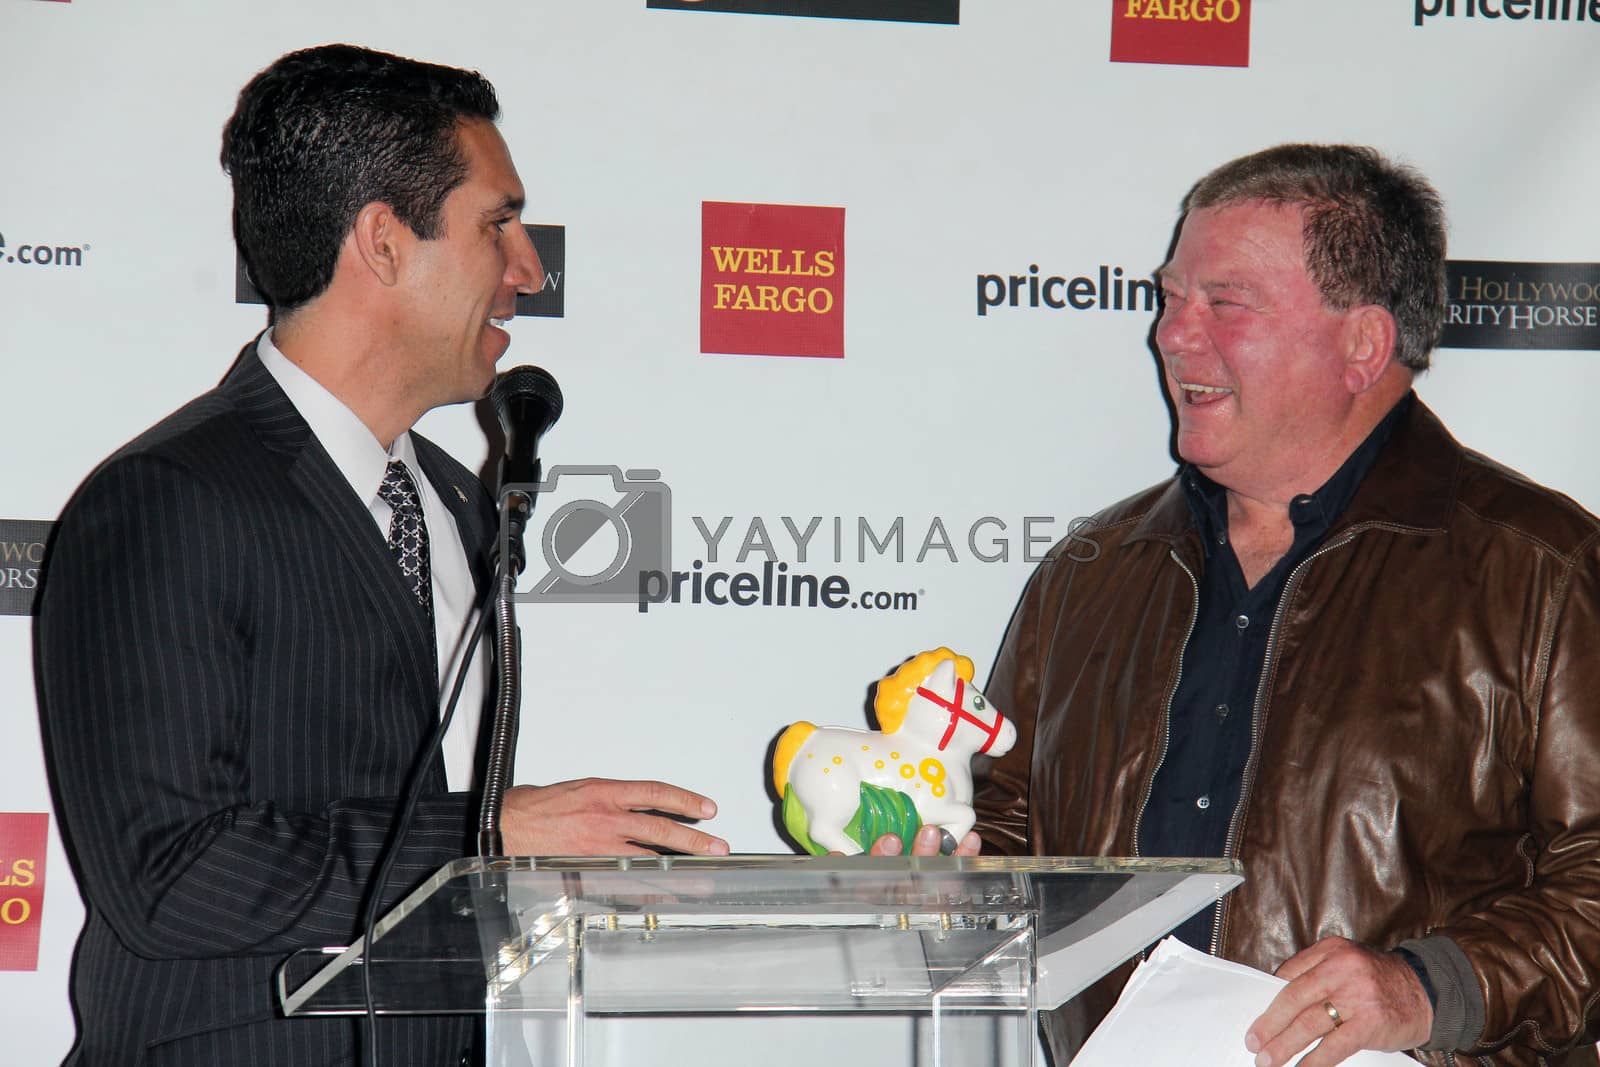 Royalty free image of William Shatner at the Priceline.com Hollywood Charity Horse Show Event, Firenze Osteria, Toluca Lake, CA 01-29-14/ImageCollect by ImageCollect